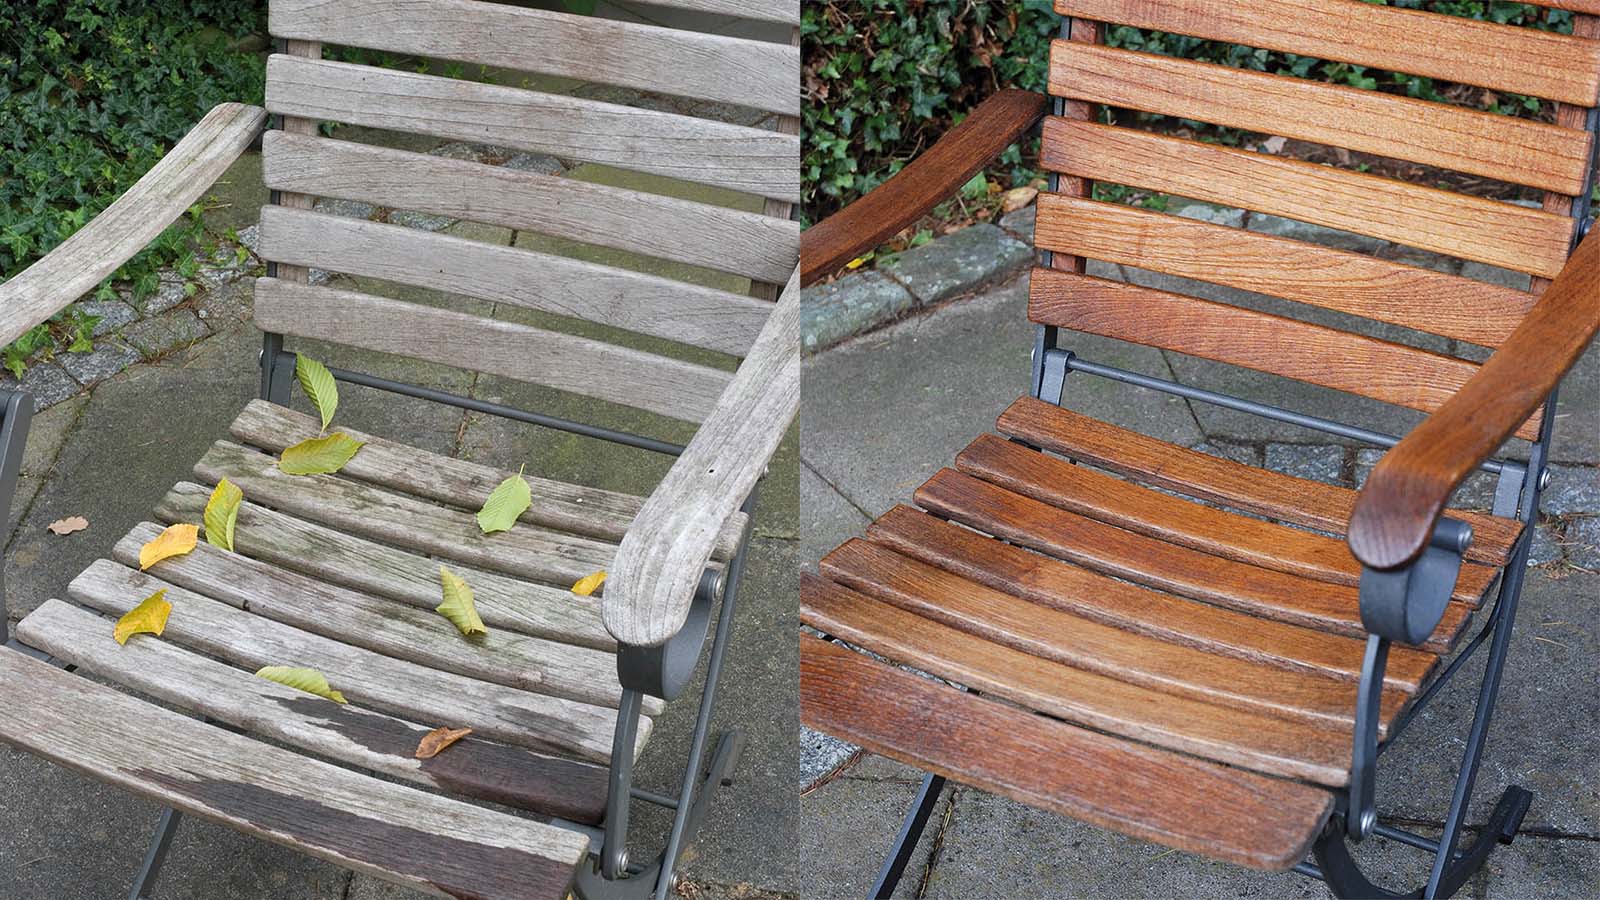 Renovate Wooden Garden Furniture With, What Do You Oil Outdoor Furniture With